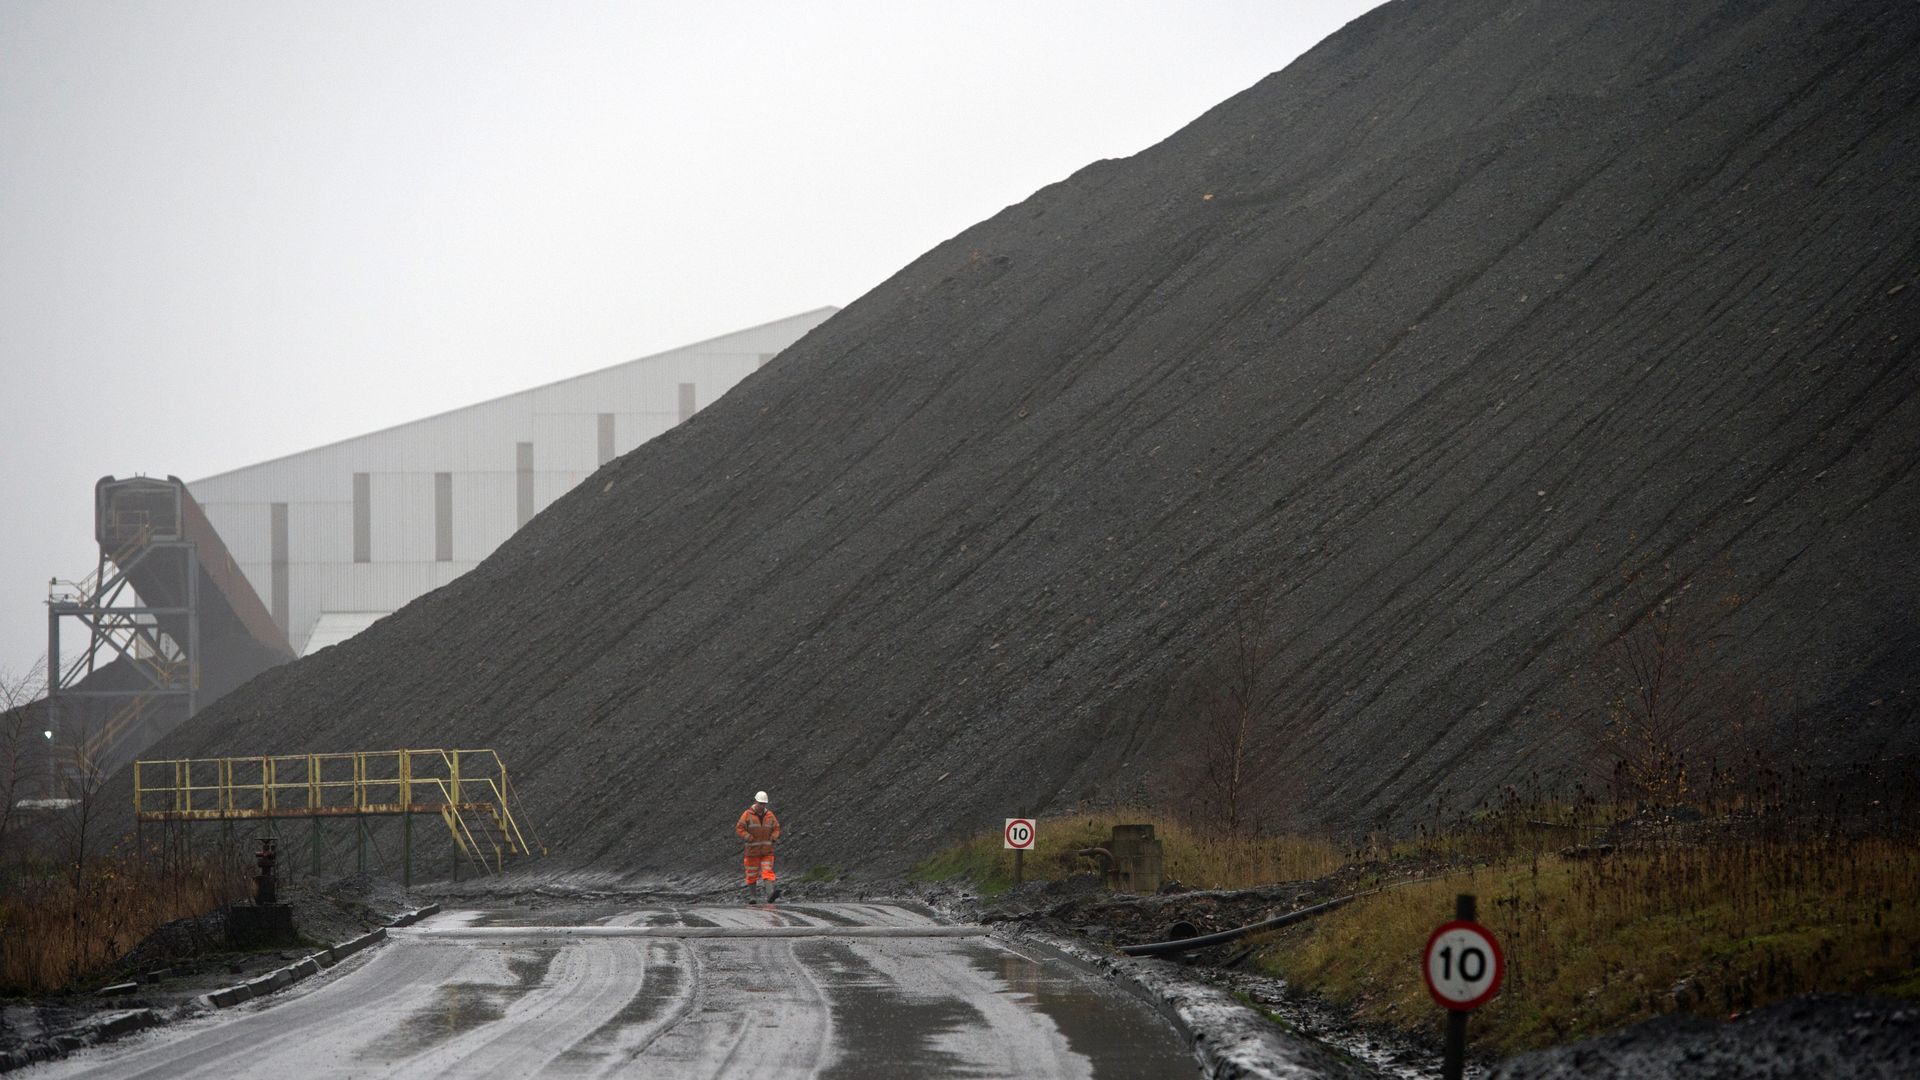 a slag heap at the entrance to Kellingley Colliery, the last deep coal mine operating in Britain near Knottingley, northern England